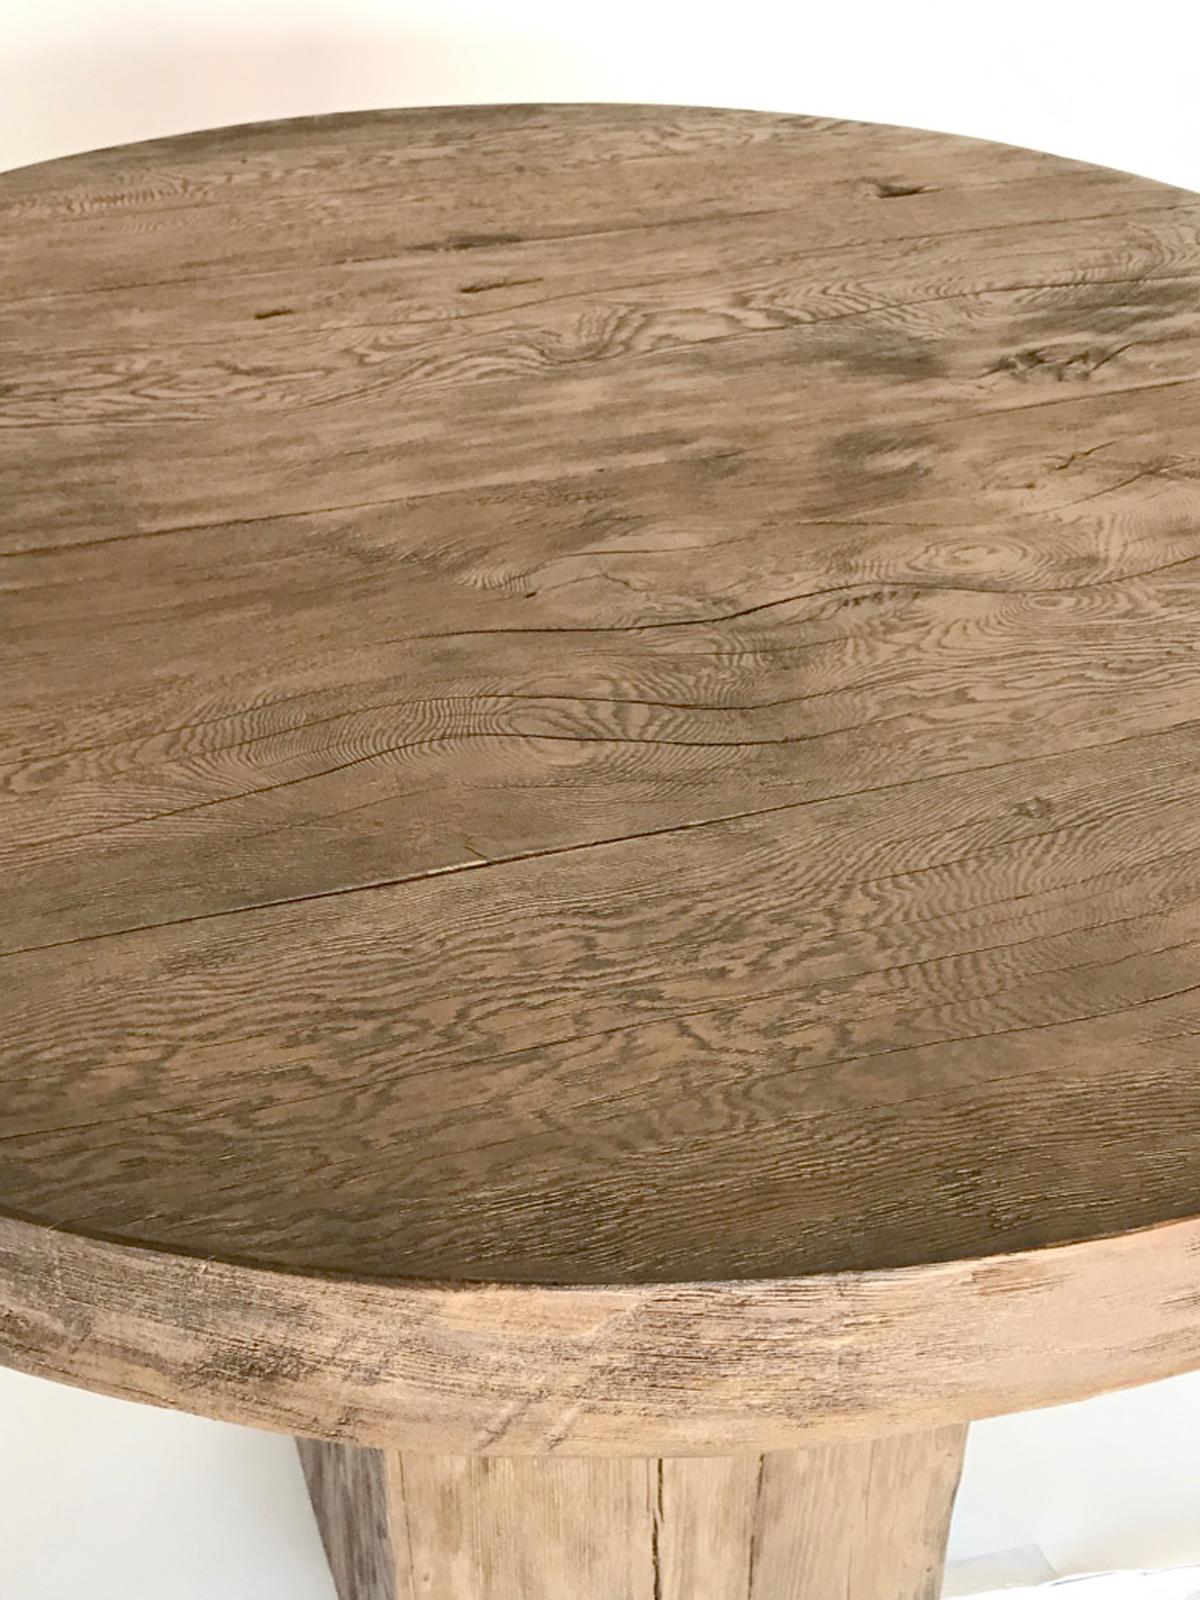 Rustic Modern Round Pedestal Table by Dos Gallos Studio In Distressed Condition In Los Angeles, CA